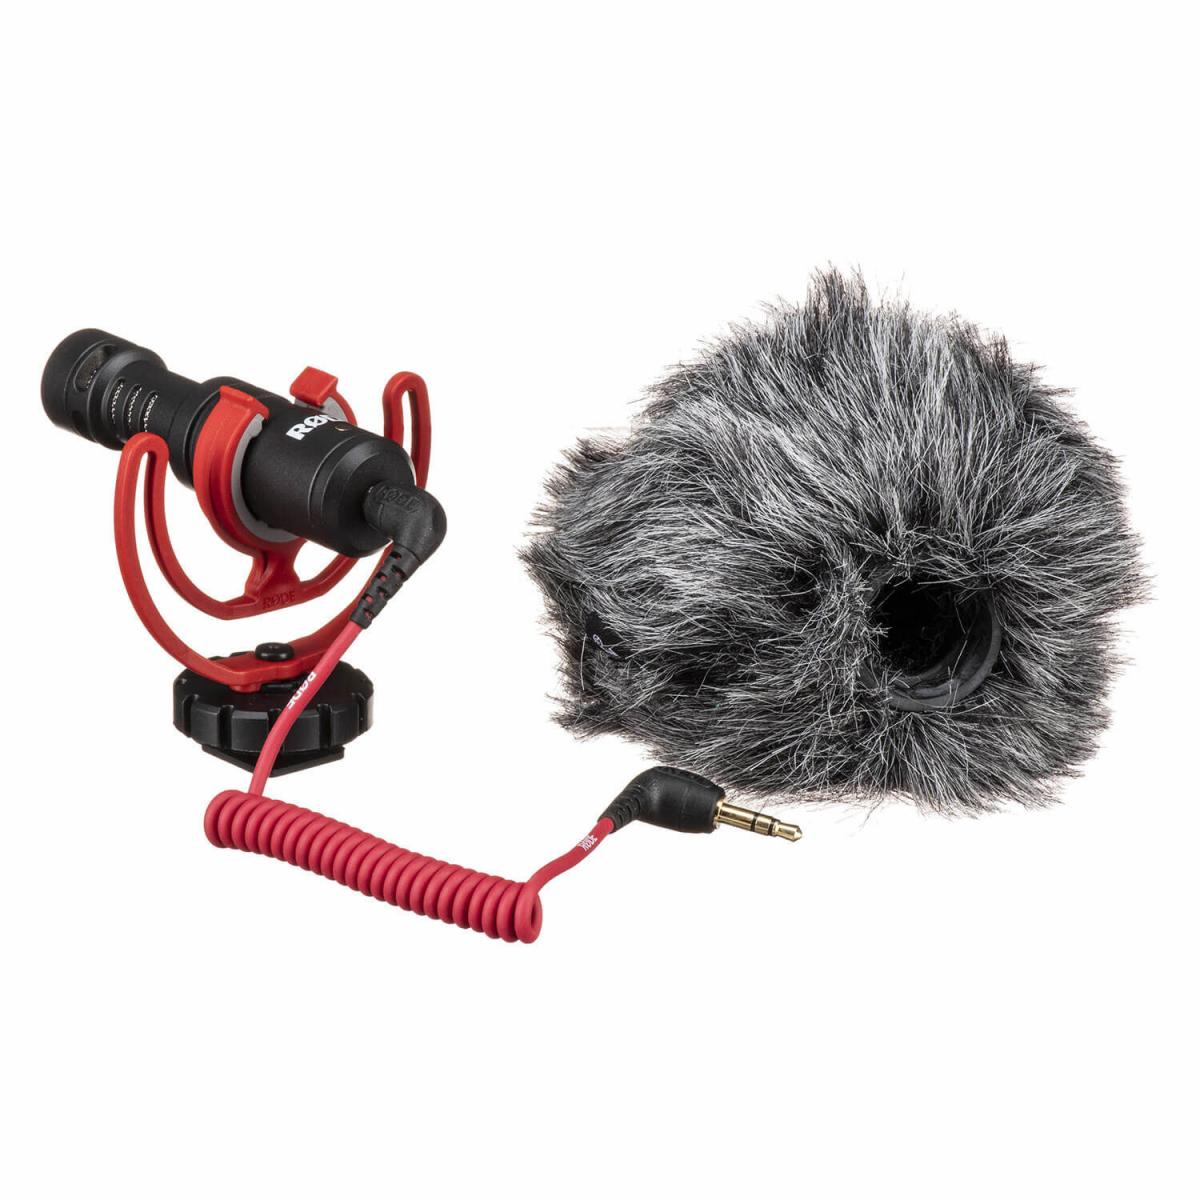 RODE 105559 VideoMicro - compact on-camera microphone with Rycote Lyre shock mount